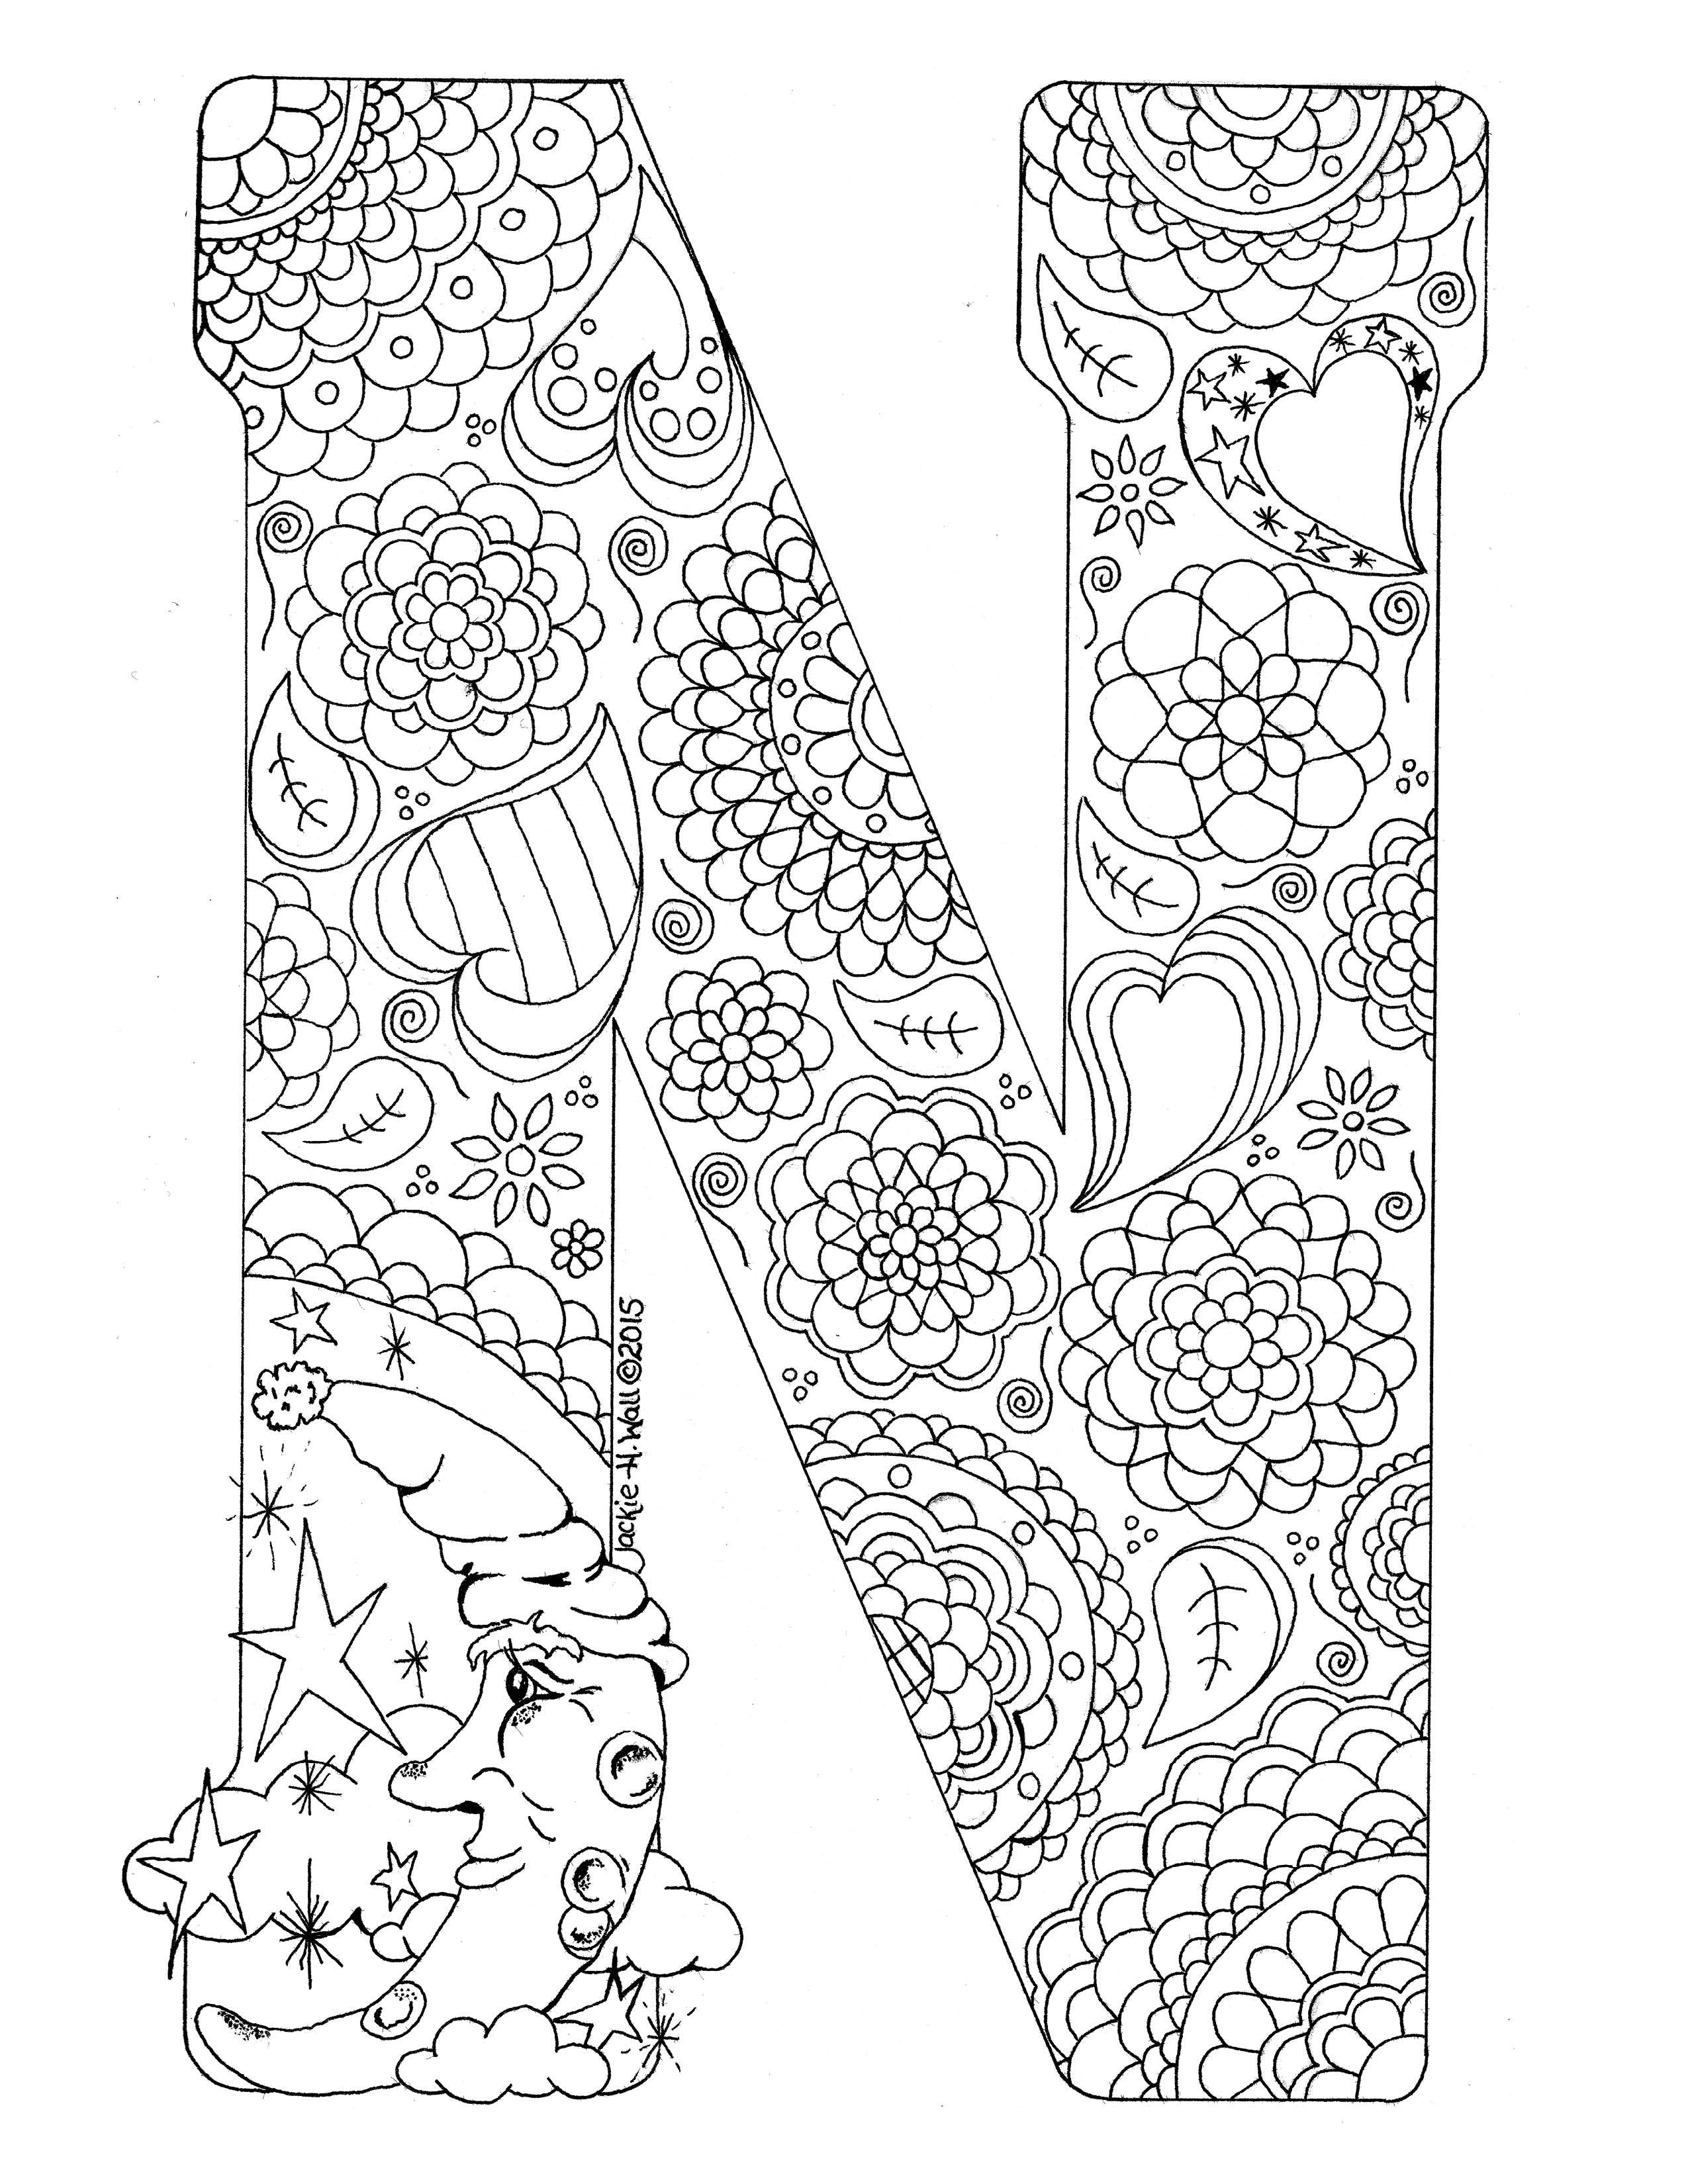 letter-n-colouring-page-jackie-wall-studio